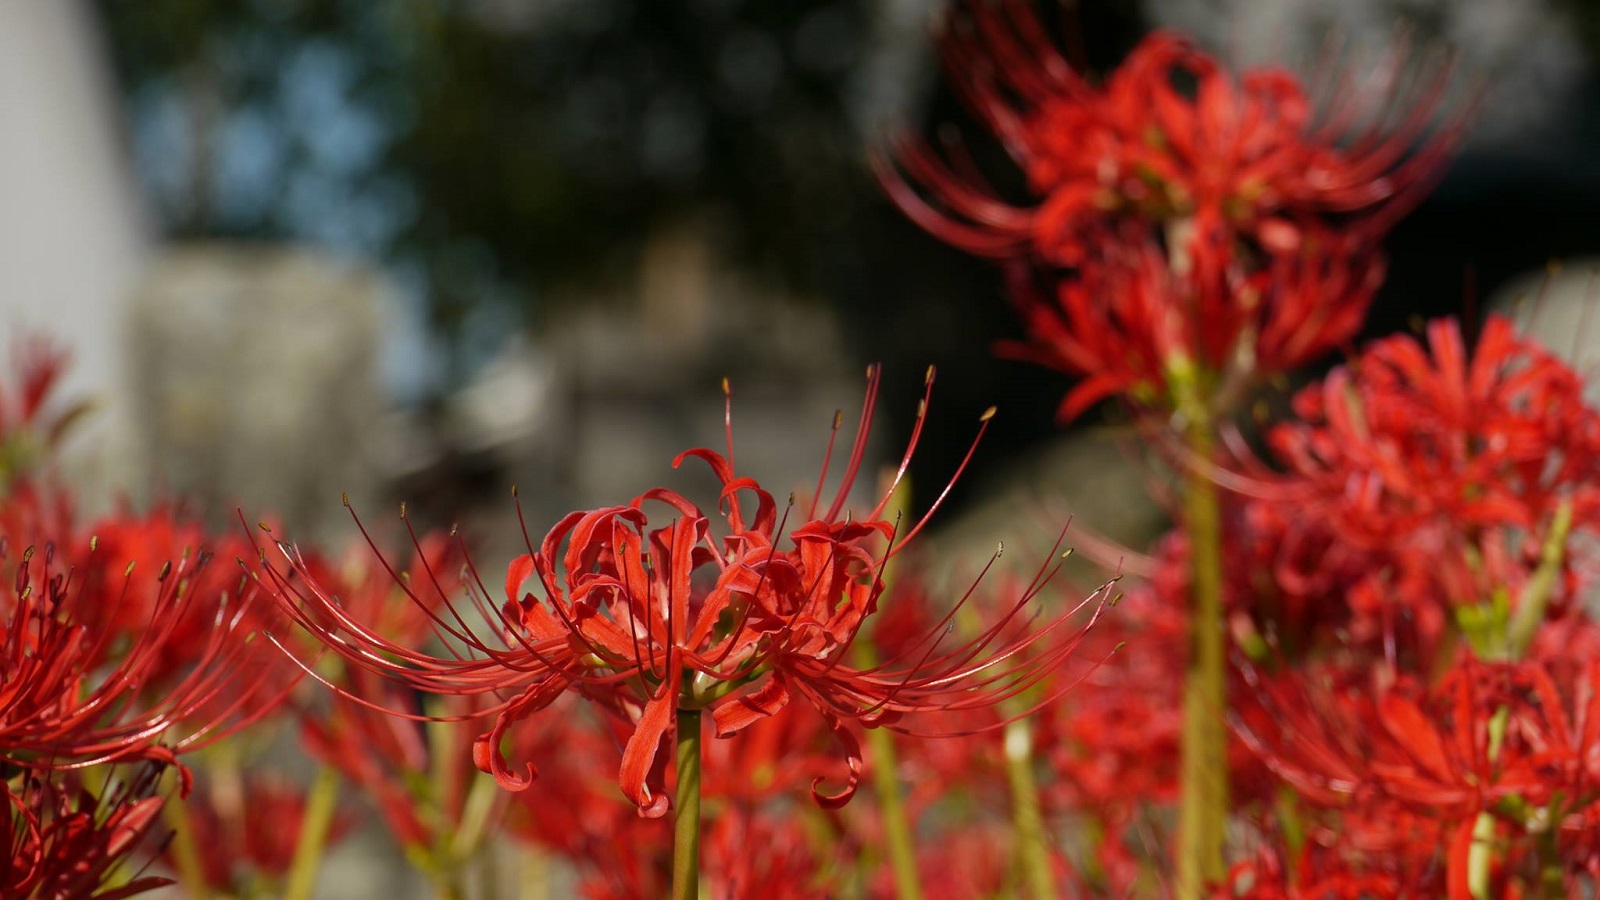 Spider_lily_sho_1600x900